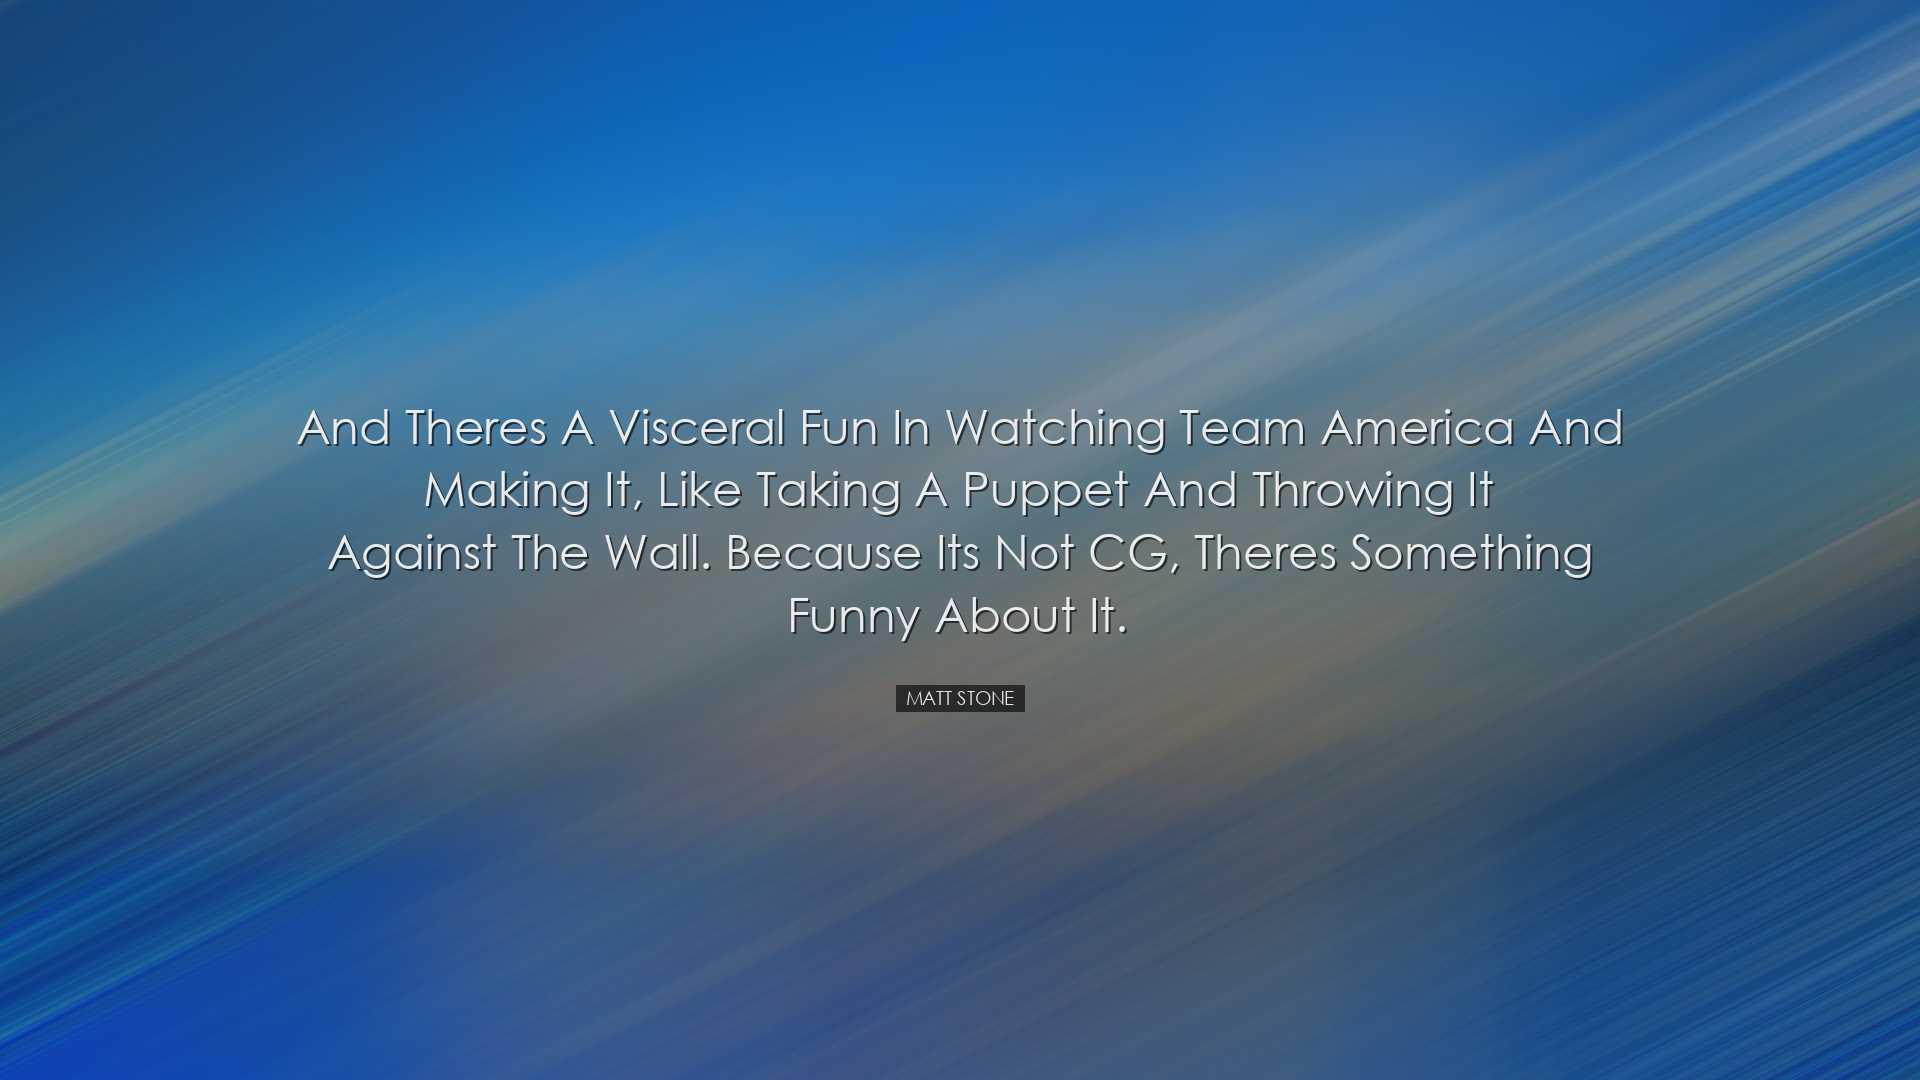 And theres a visceral fun in watching Team America and making it,